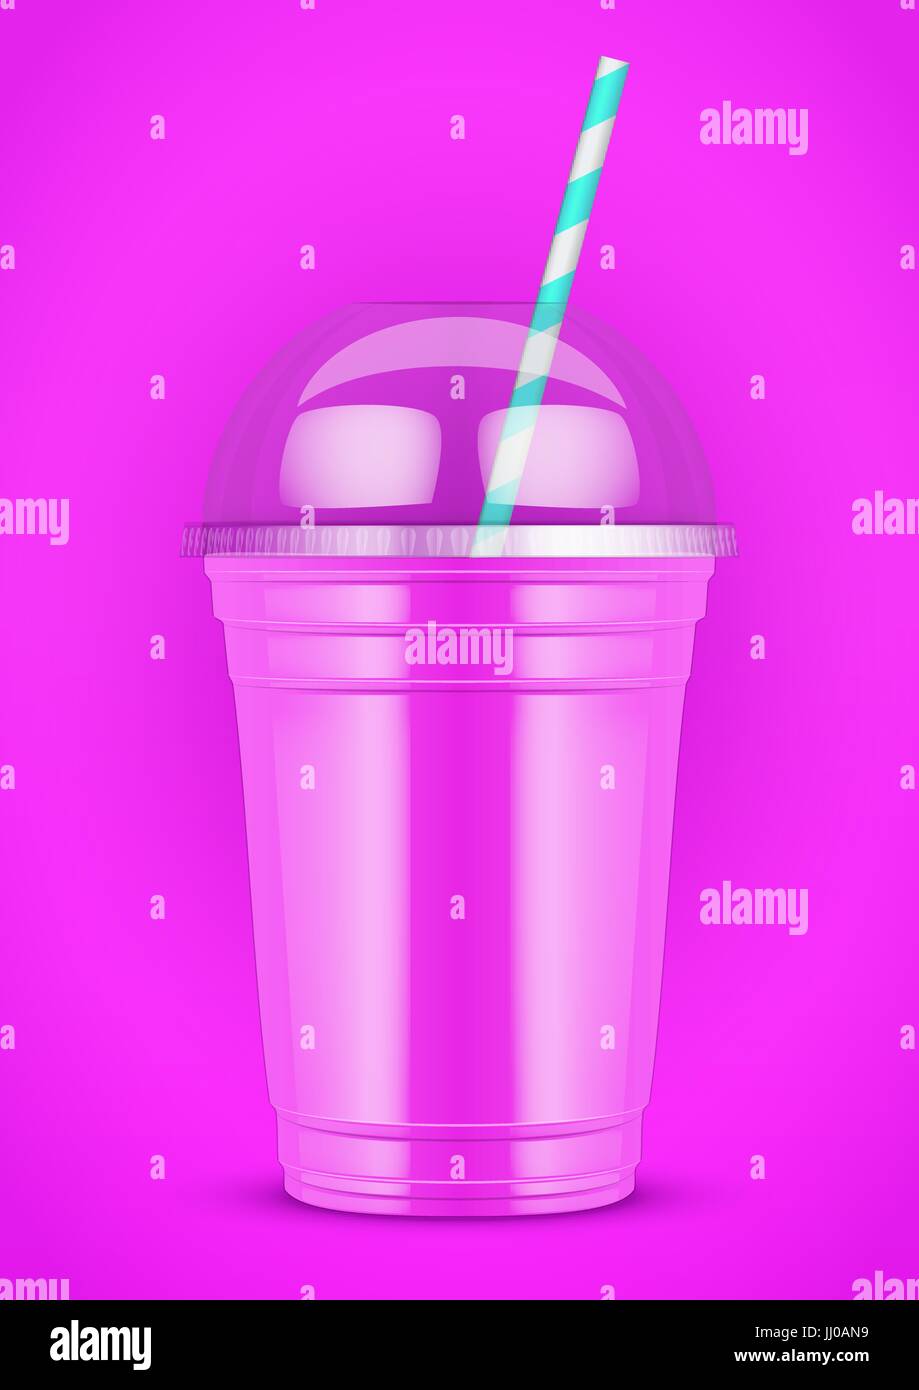 https://c8.alamy.com/comp/JJ0AN9/plastic-cup-with-smoothie-and-tube-JJ0AN9.jpg